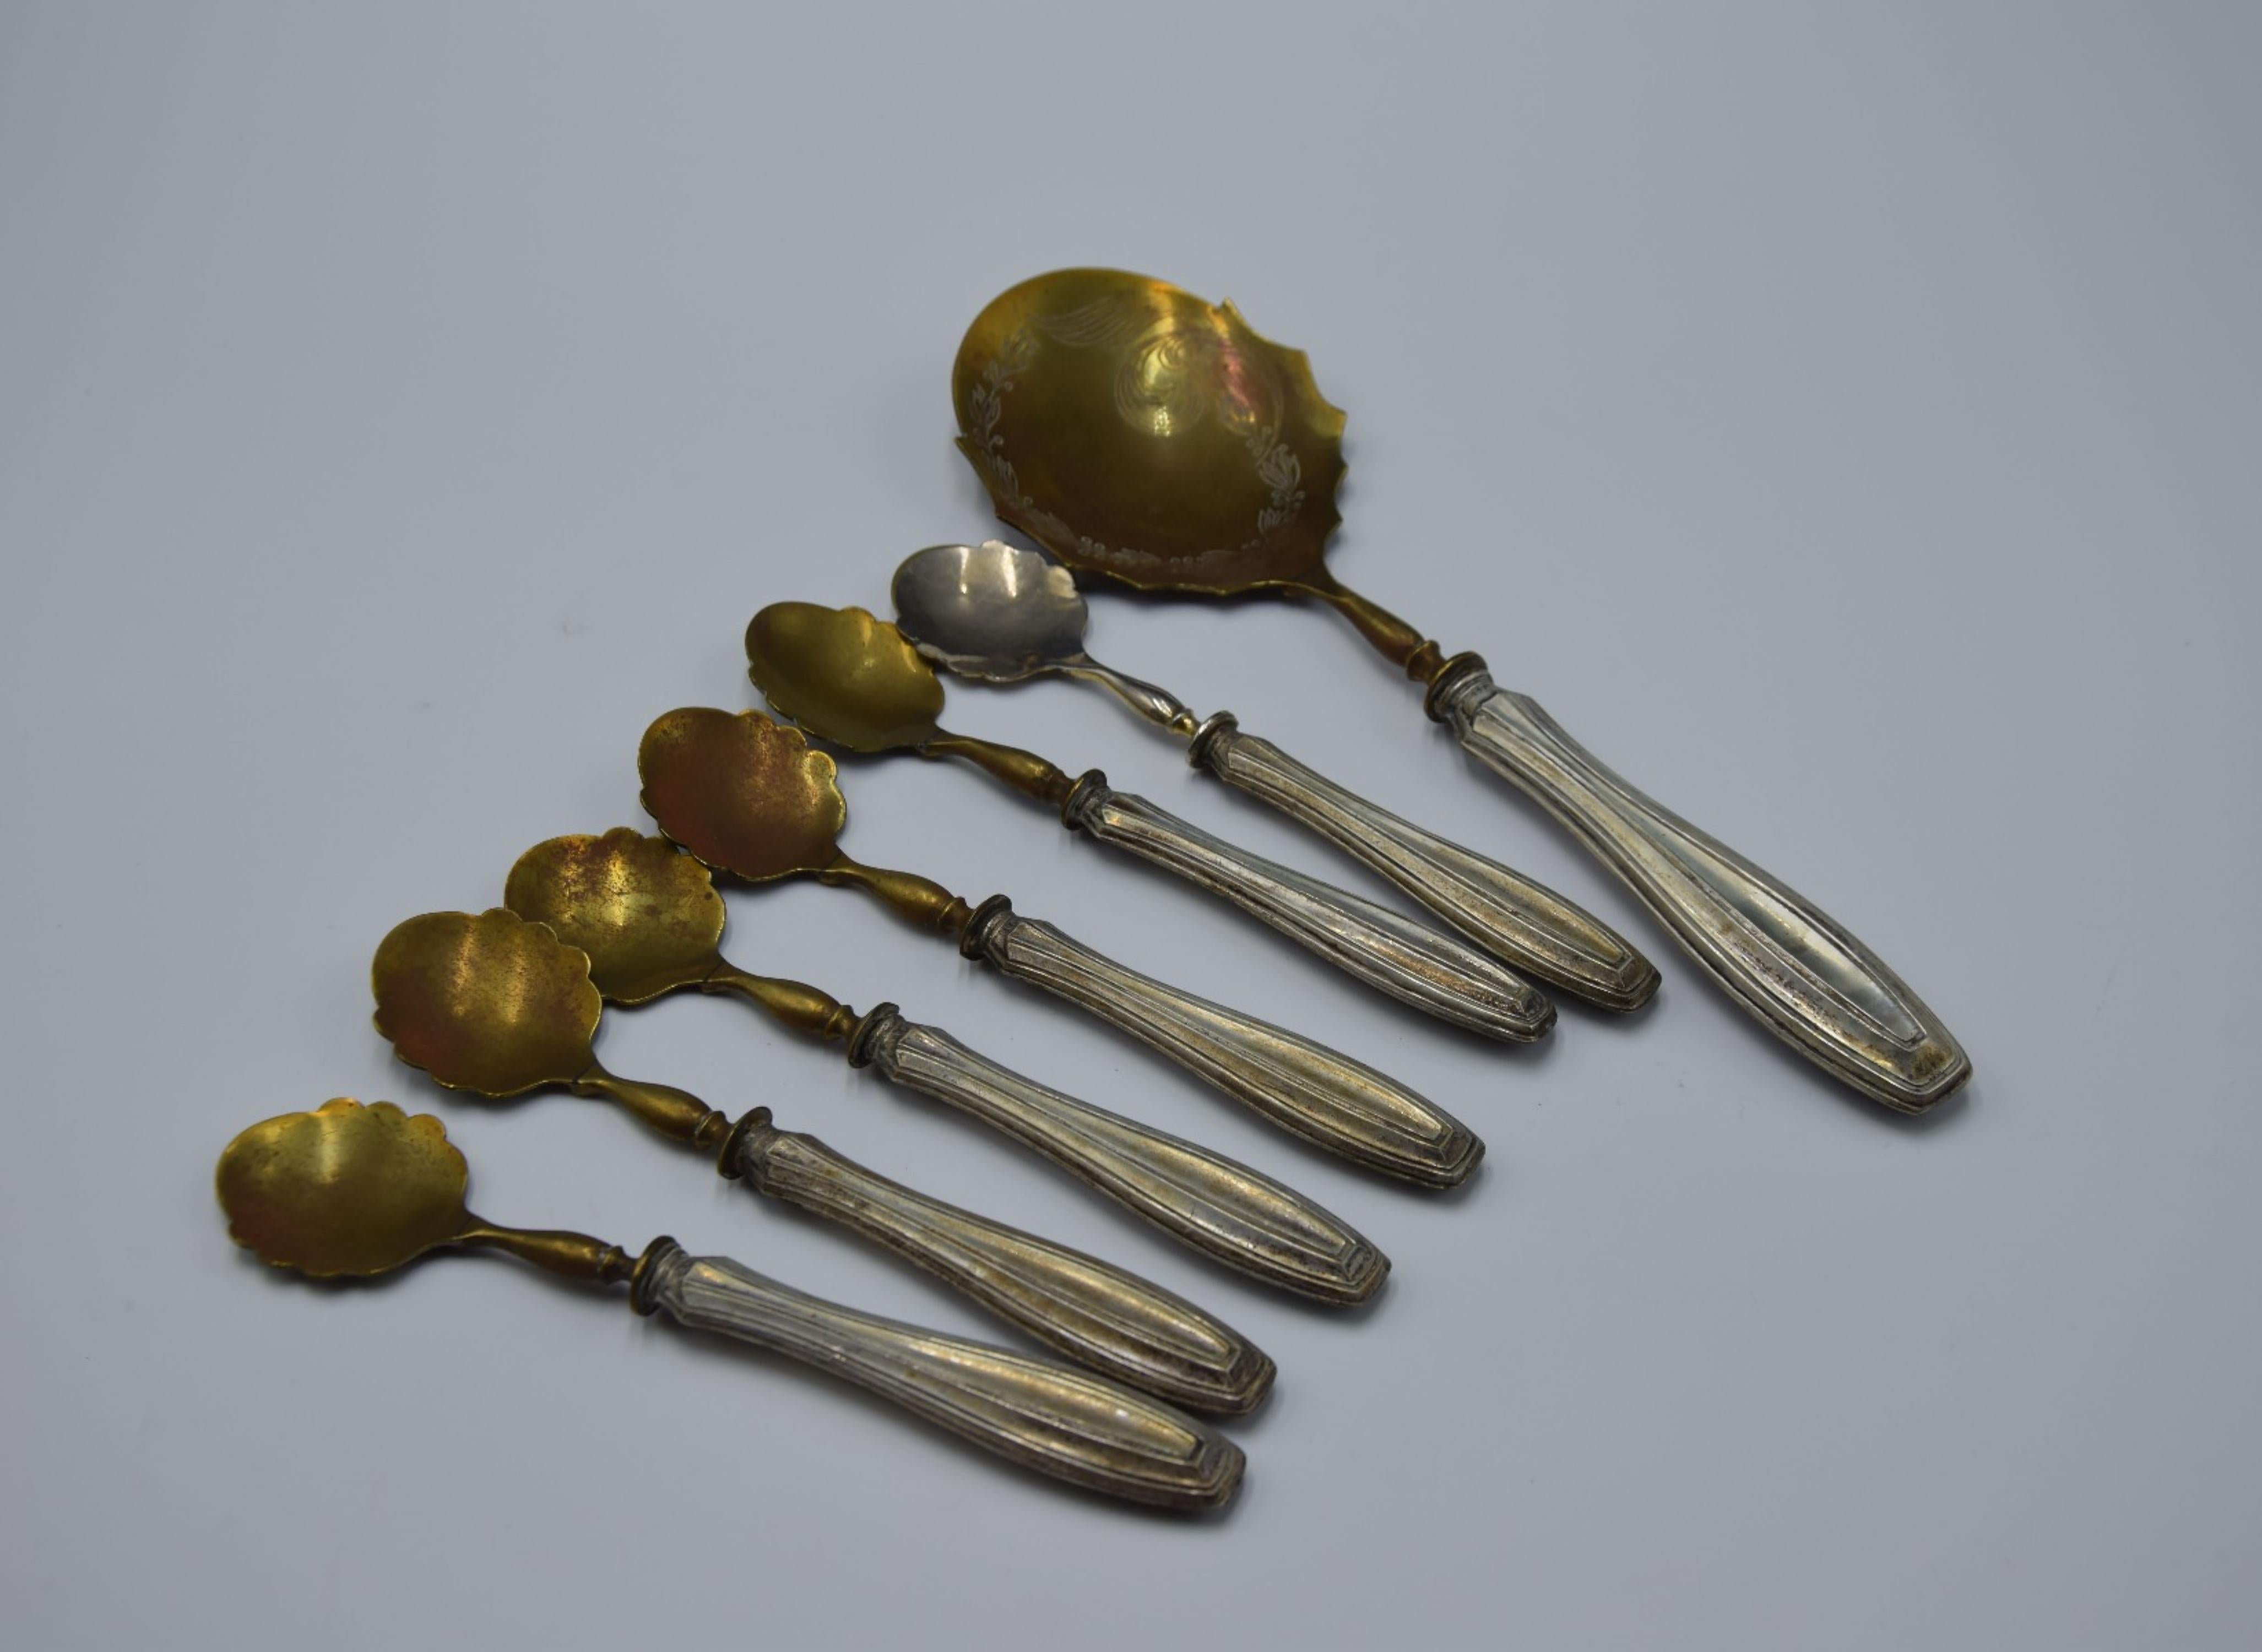 Precious ice cream set is a set of dessert cutlery realized in 19th century. Sterling silver and brass.

The lot consist in six antique little spoon and a big one for serving ice cream.

Dimension: 

Little spoon: 16.5 x 3.5 cm

Big spoon: